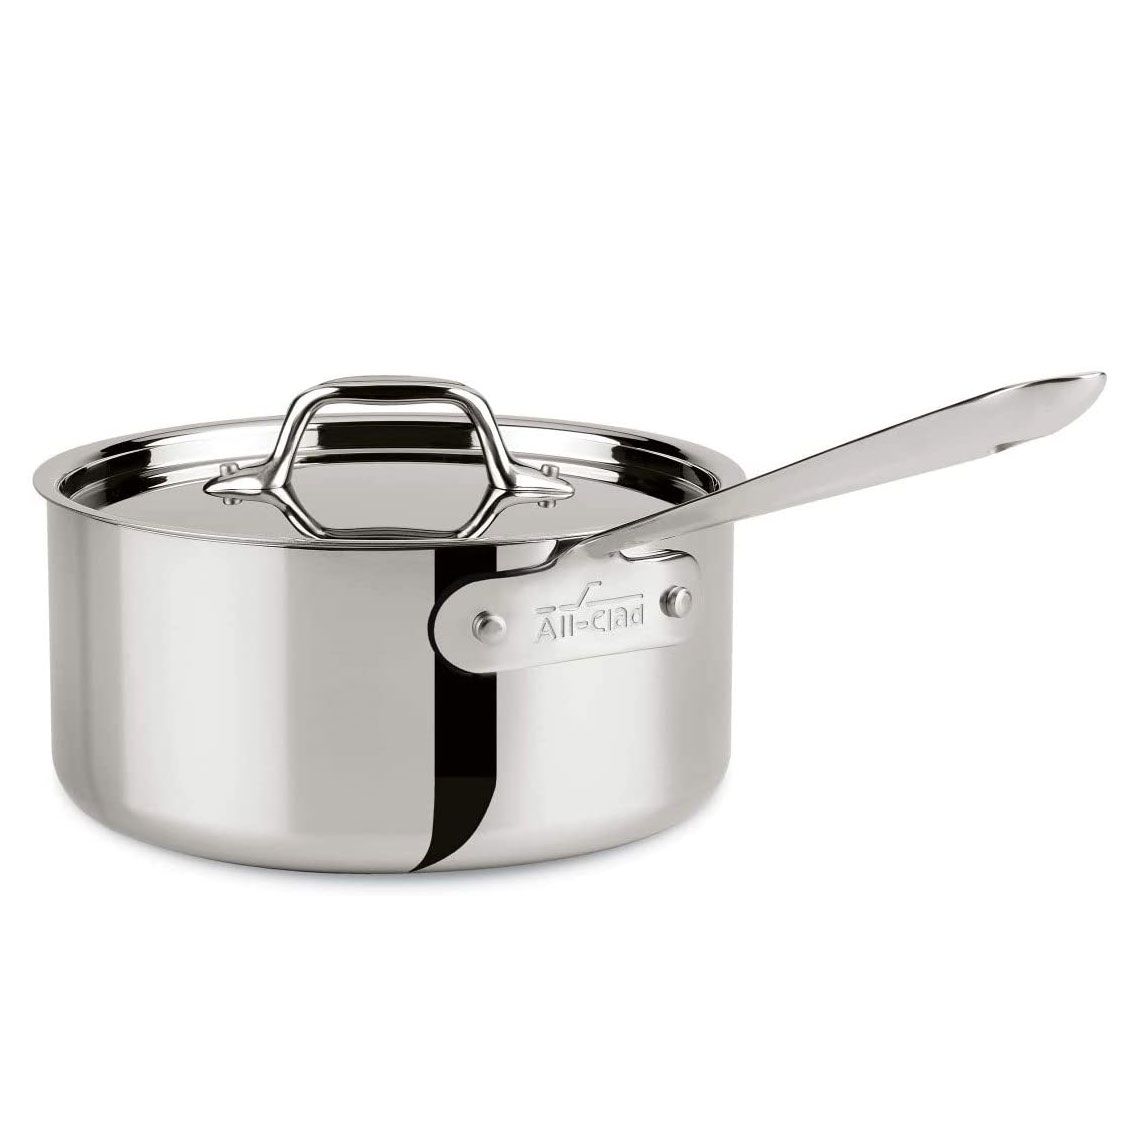 All Clad stainless steel saucepan